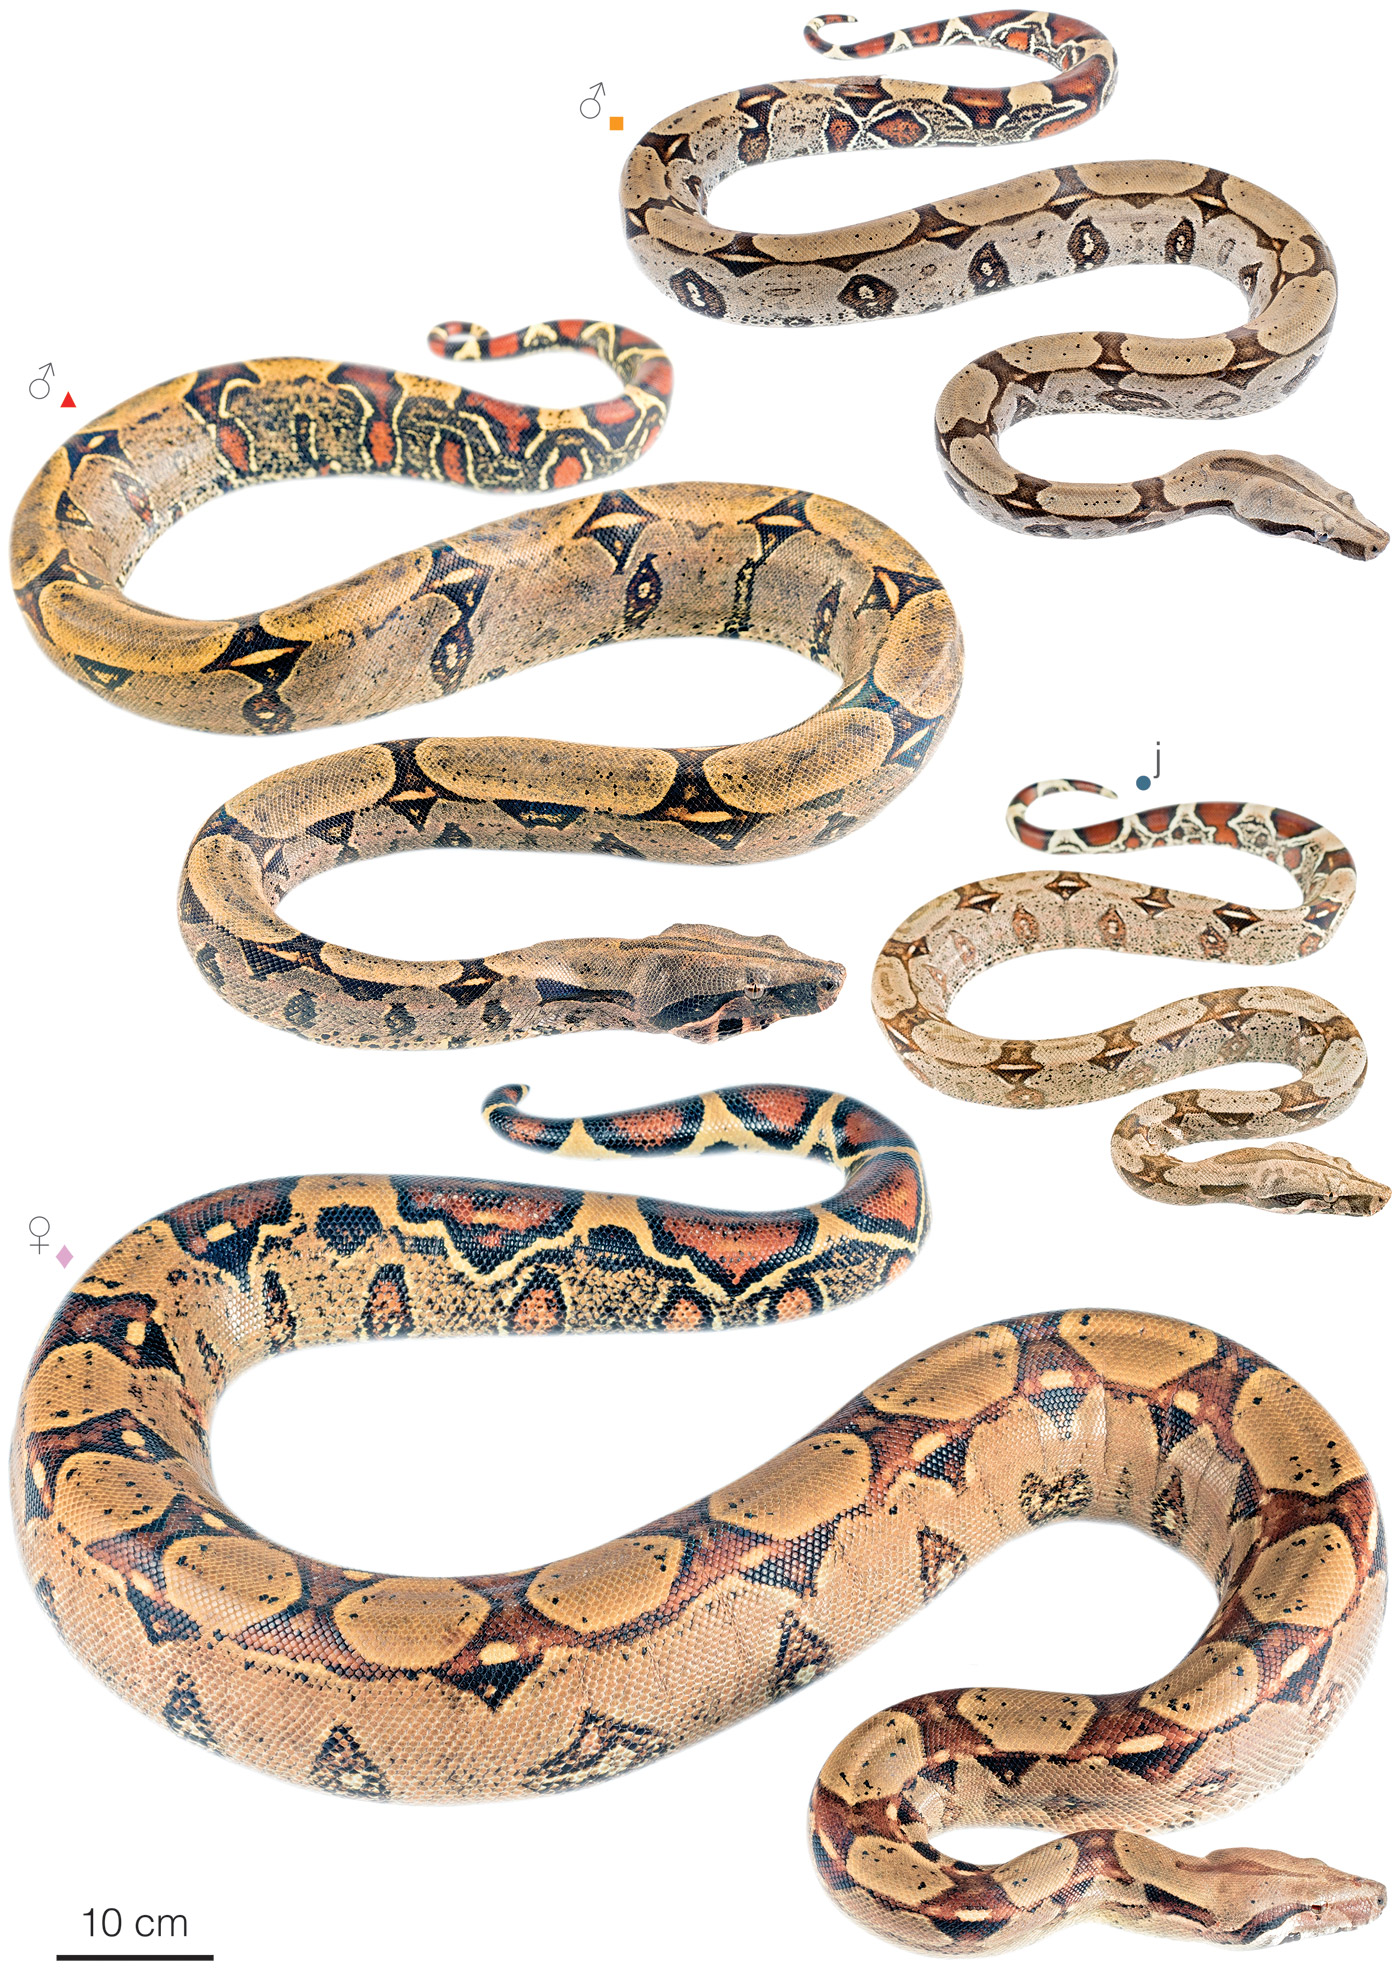 Figure showing variation among individuals of Boa constrictor